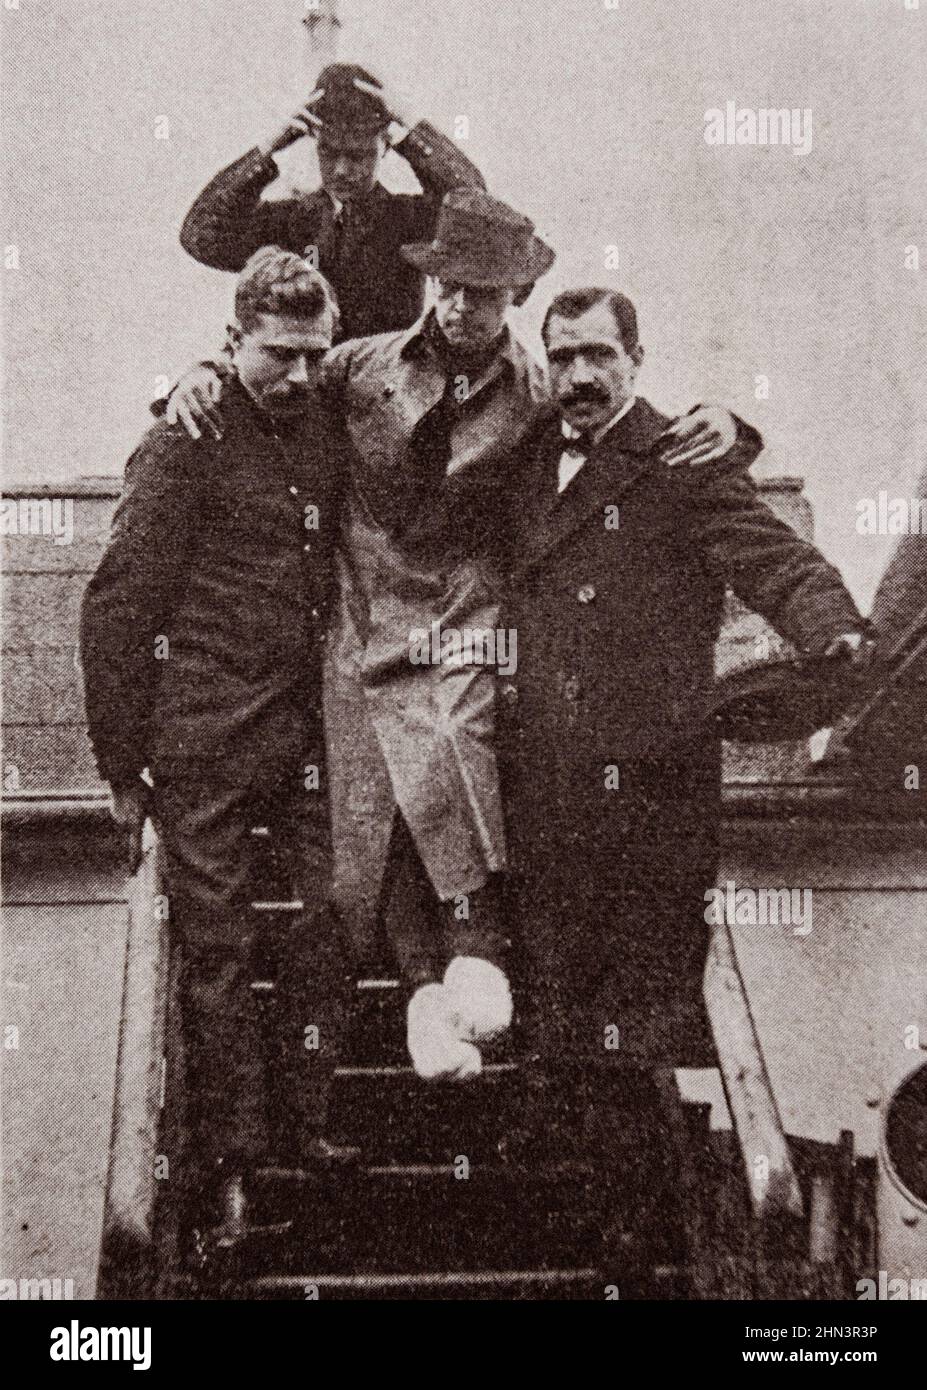 Sinking of the 'Titanic'.  1912 The second radio-telegraphist of the Titanic, H. Bride, who had his feet crushed and frozen in one of the lifeboats. Stock Photo